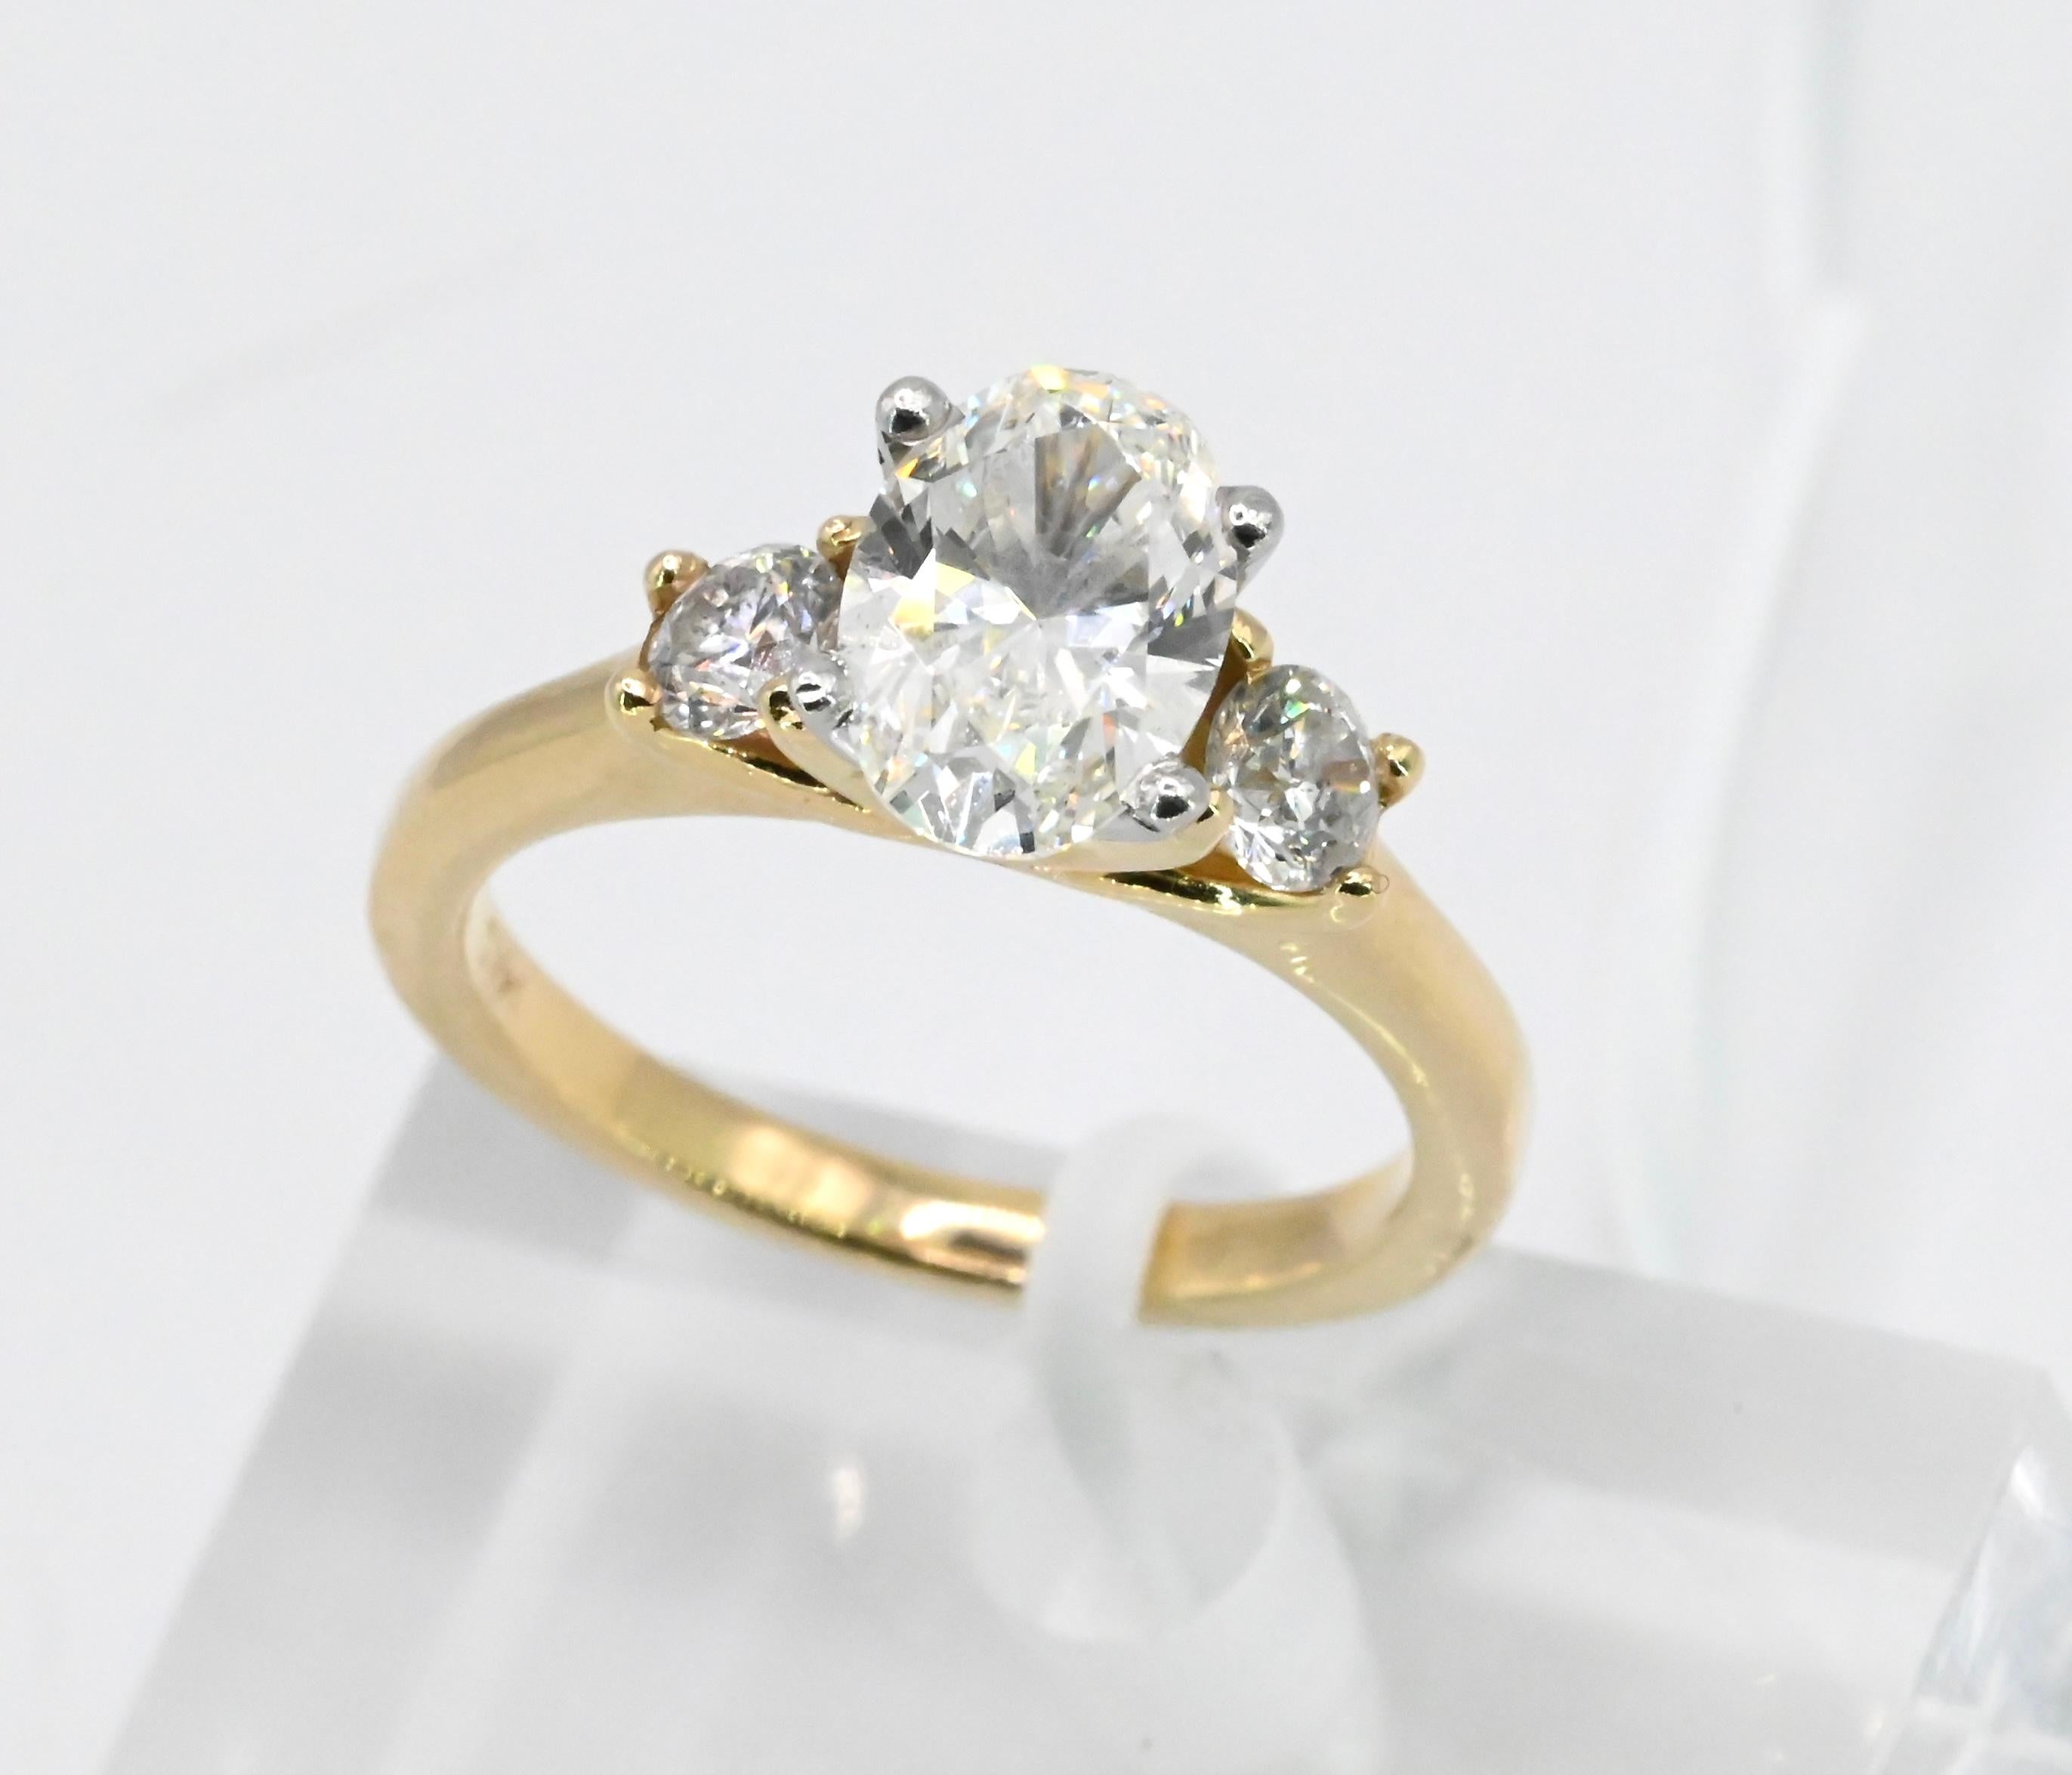 Lovely GIA Certified Oval Shaped Diamond Ring 1.21 TCW